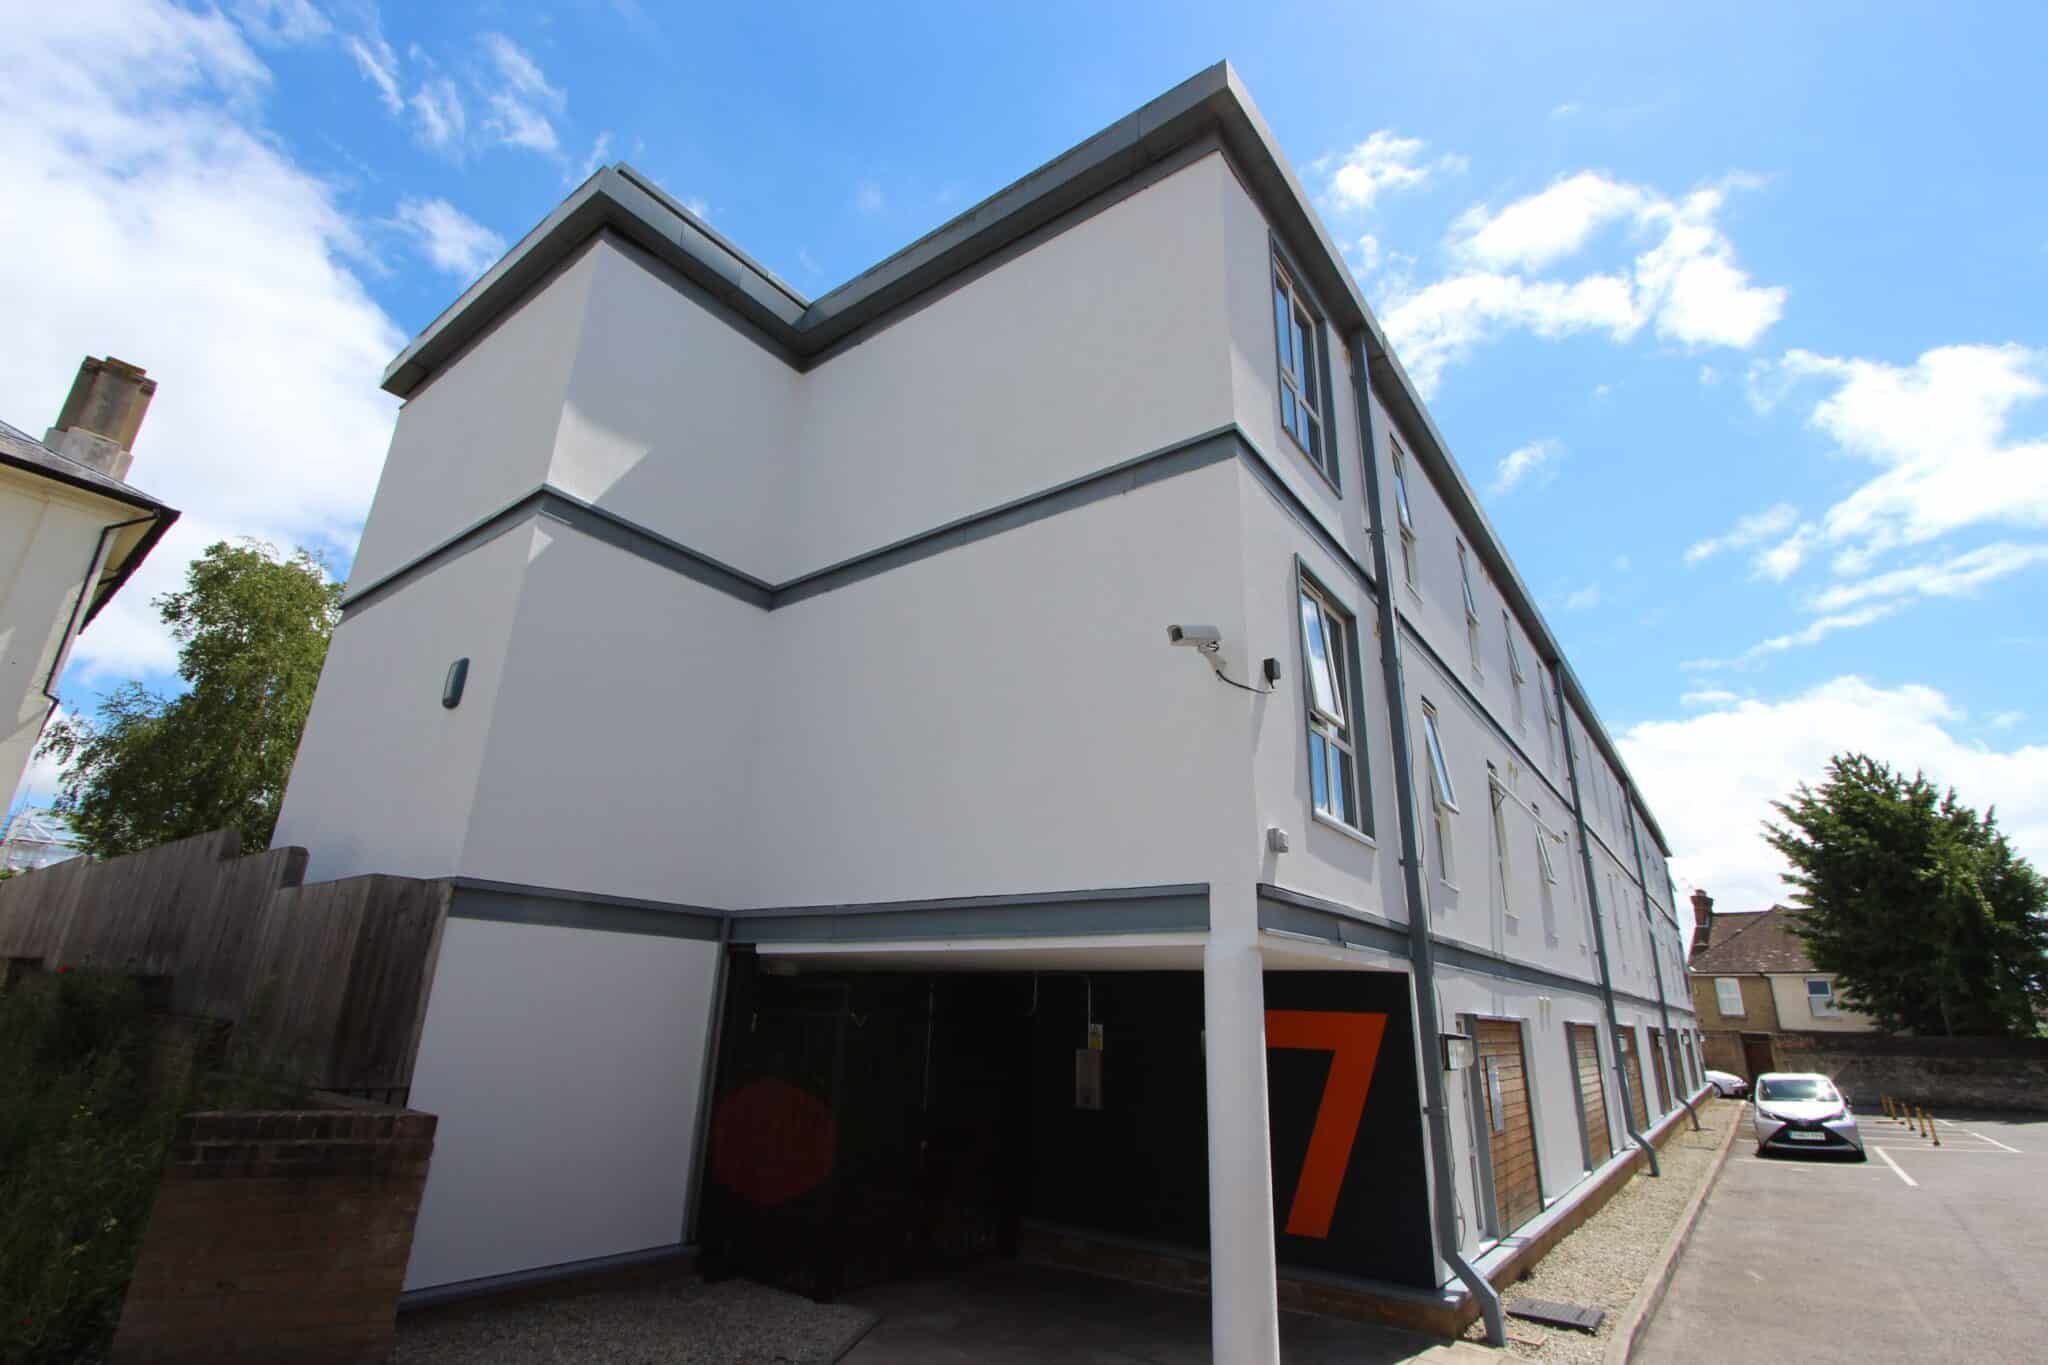 Flat 2 Bower Terrace, Orchard House, Maidstone, 7 Bower Terrace, ME16 8RY